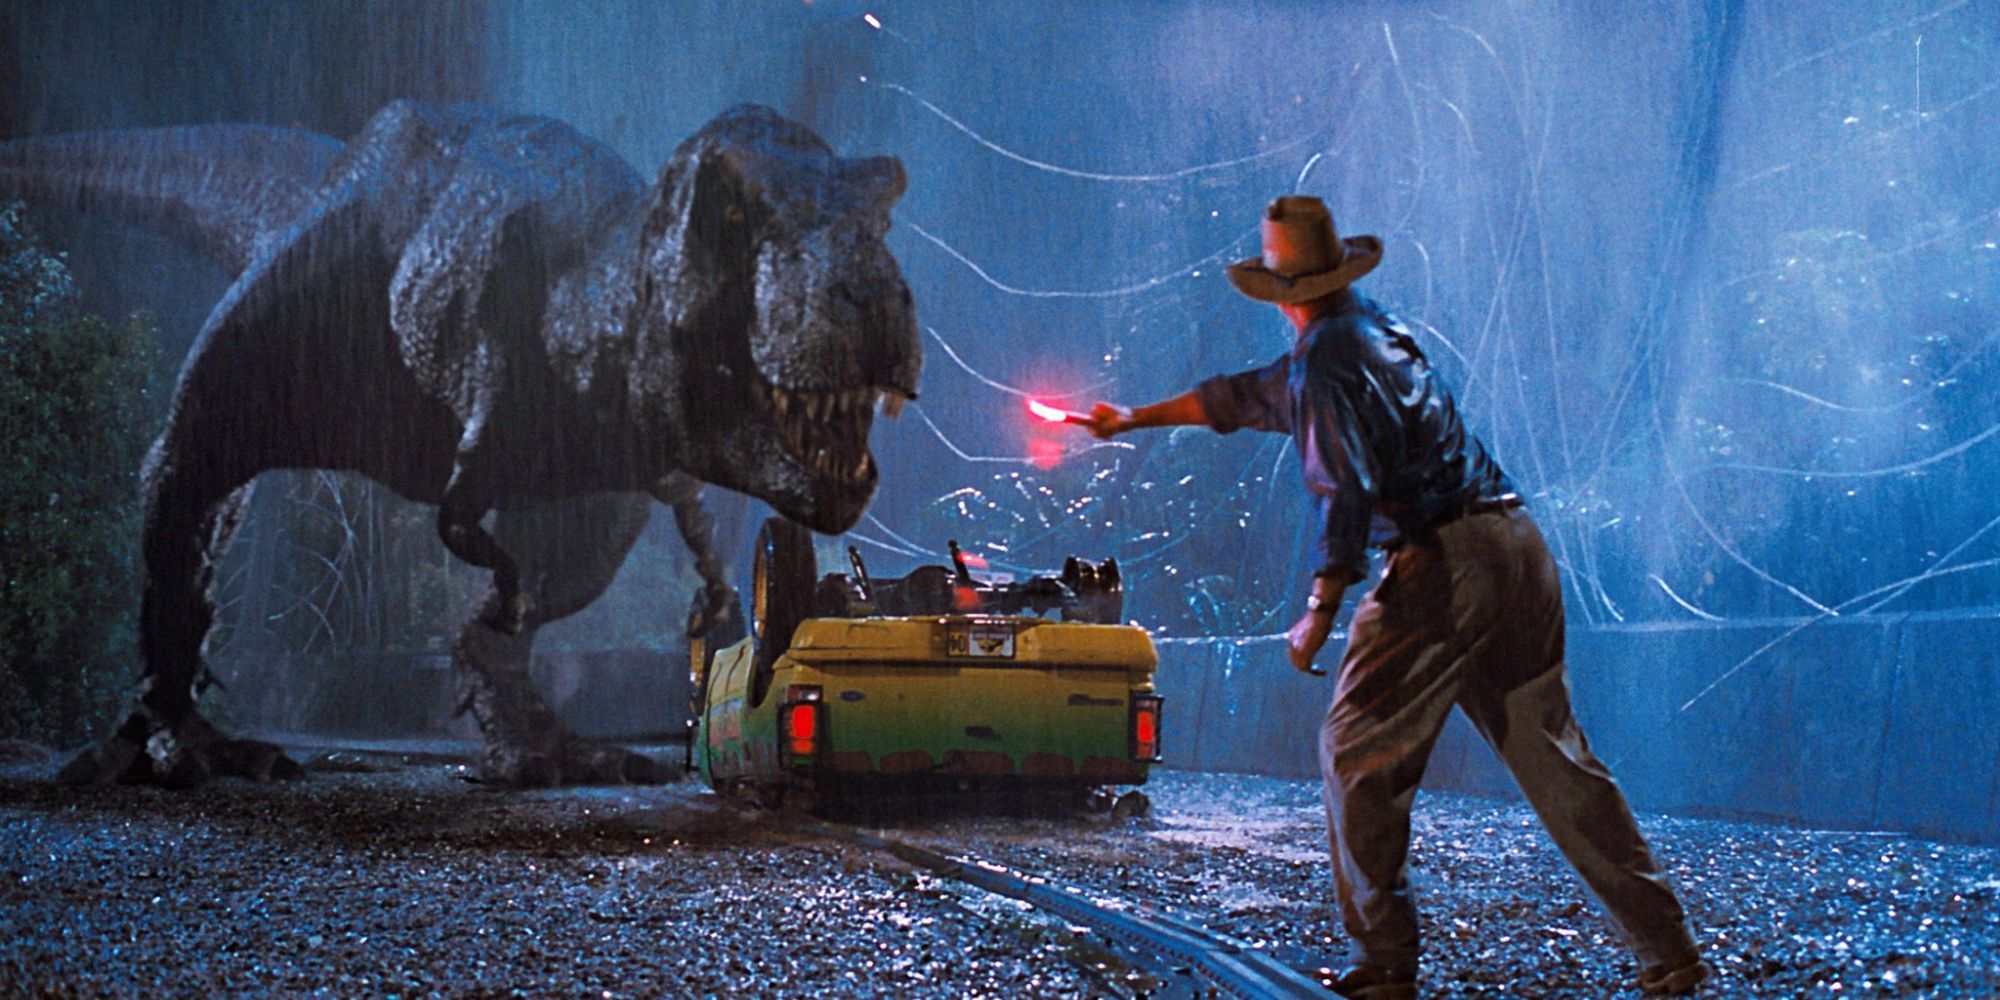 Jurassic Park - T-Rex on the Rampage